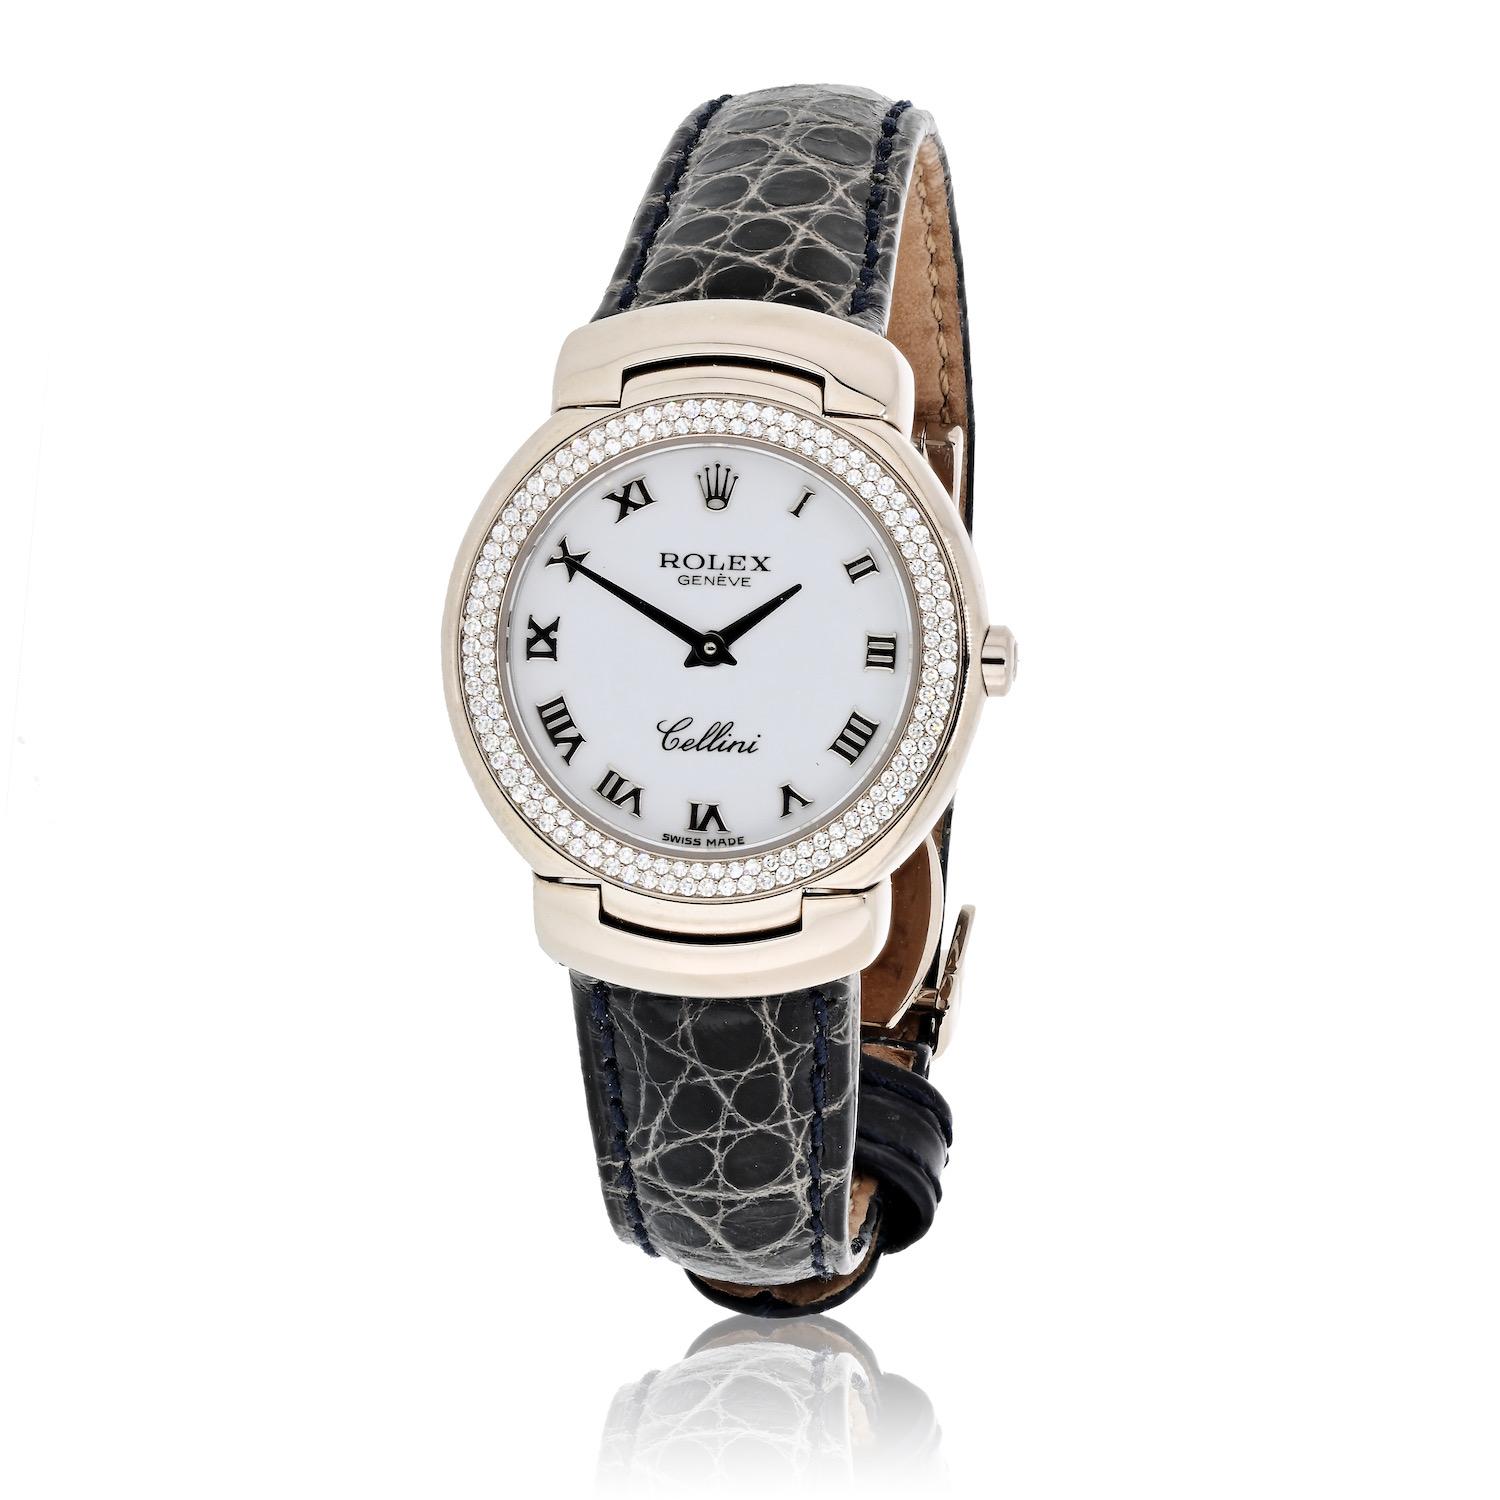 Rolex Cellini 18K White Gold Cellissima 26mm Dial Diamond Bezel 6671 Watch – a masterpiece that seamlessly fuses elegance and precision. This exquisite timepiece showcases a luxurious 18k white gold case, measuring 26.0 mm, perfectly balanced for a